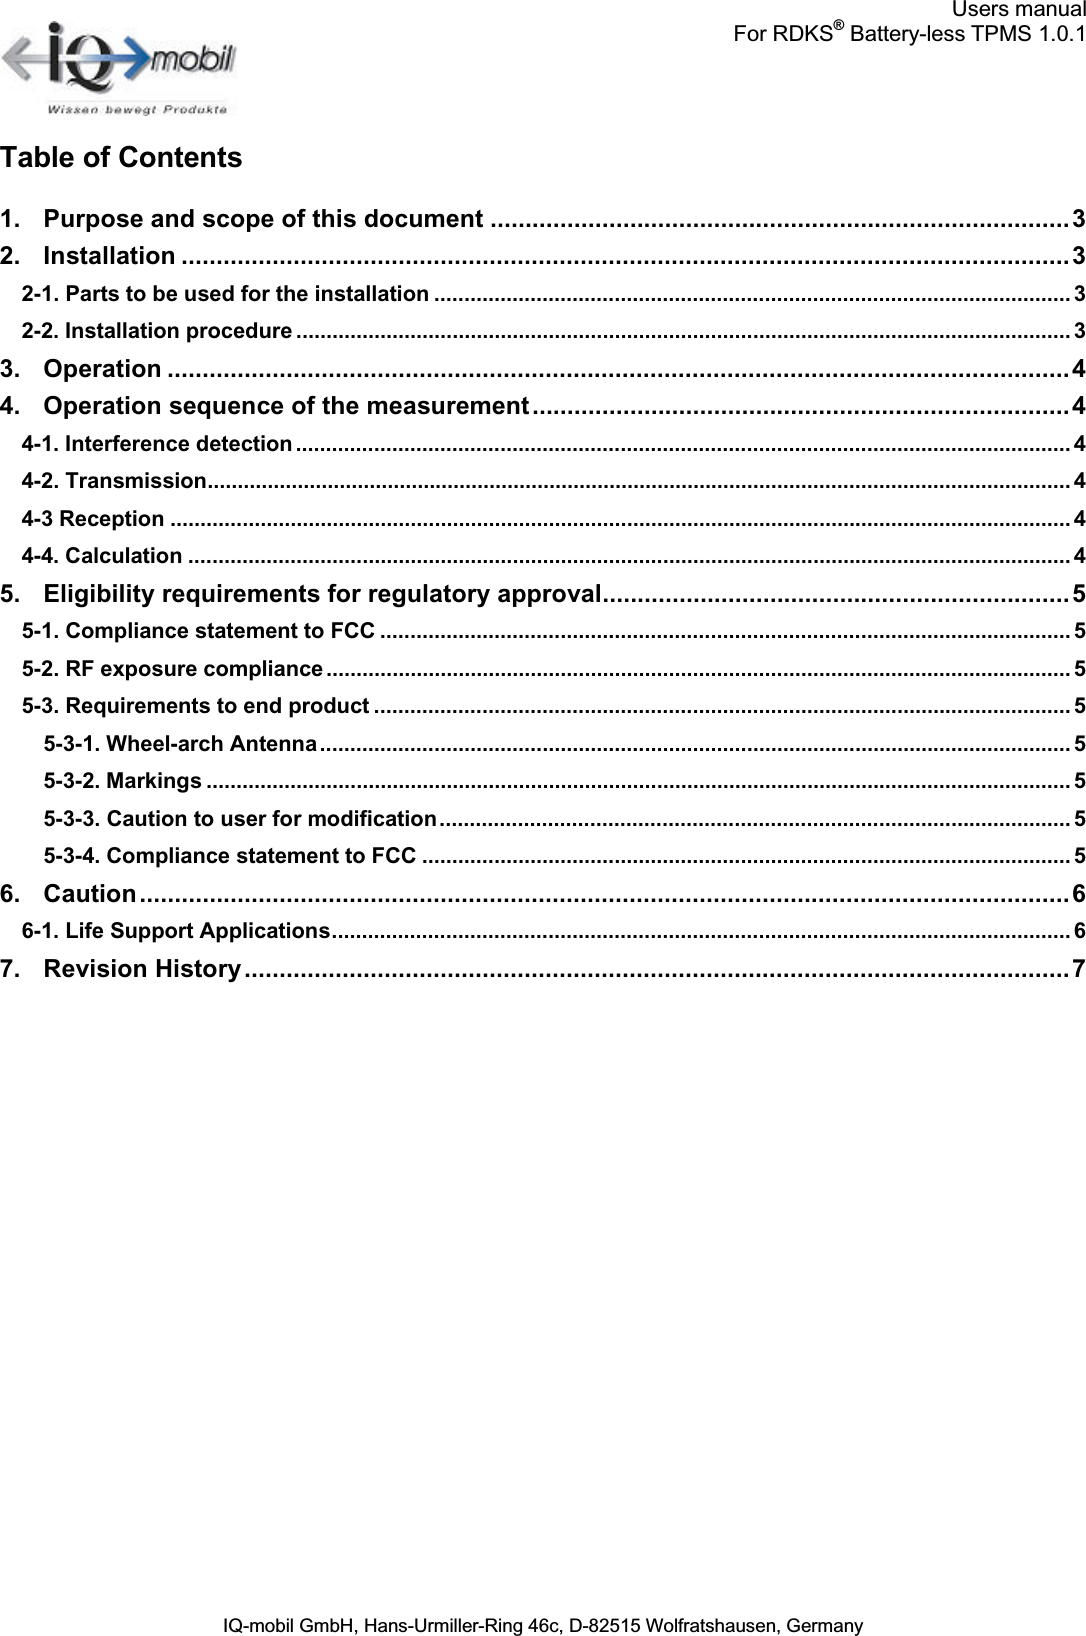 Users manualFor RDKS®Battery-less TPMS 1.0.1IQ-mobil GmbH, Hans-Urmiller-Ring 46c, D-82515 Wolfratshausen, GermanyTable of Contents1. Purpose and scope of this document ...................................................................................32. Installation ...............................................................................................................................32-1. Parts to be used for the installation .......................................................................................................... 32-2. Installation procedure ................................................................................................................................. 33. Operation .................................................................................................................................44. Operation sequence of the measurement.............................................................................44-1. Interference detection ................................................................................................................................. 44-2. Transmission................................................................................................................................................ 44-3 Reception ...................................................................................................................................................... 44-4. Calculation ................................................................................................................................................... 45. Eligibility requirements for regulatory approval...................................................................55-1. Compliance statement to FCC ................................................................................................................... 55-2. RF exposure compliance............................................................................................................................ 55-3. Requirements to end product .................................................................................................................... 55-3-1. Wheel-arch Antenna............................................................................................................................. 55-3-2. Markings ................................................................................................................................................ 55-3-3. Caution to user for modification......................................................................................................... 55-3-4. Compliance statement to FCC ............................................................................................................ 56. Caution.....................................................................................................................................66-1. Life Support Applications........................................................................................................................... 67. Revision History......................................................................................................................7